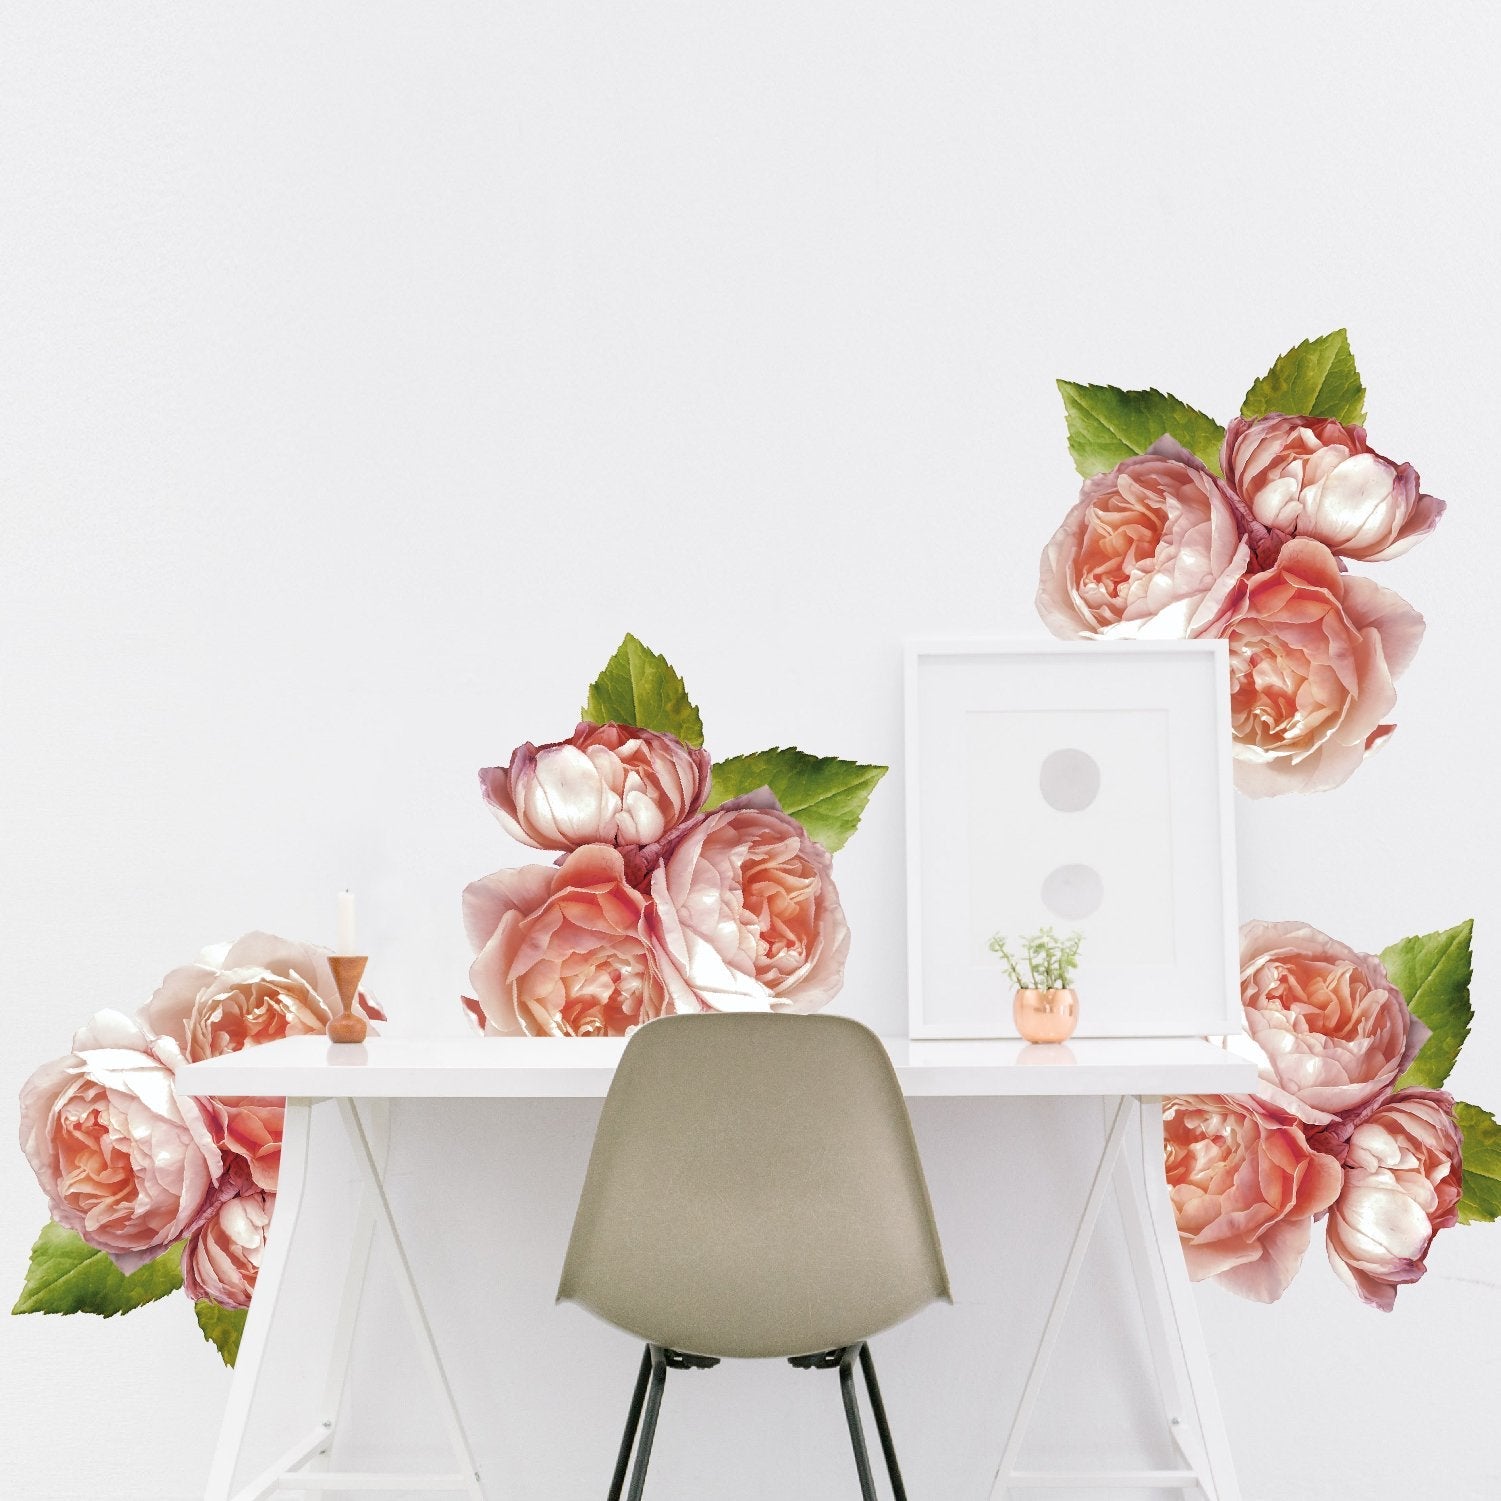 Large Rose Peonies Flower Clusters | Removable + Reusable Fabric Decals - Picture Perfect Decals